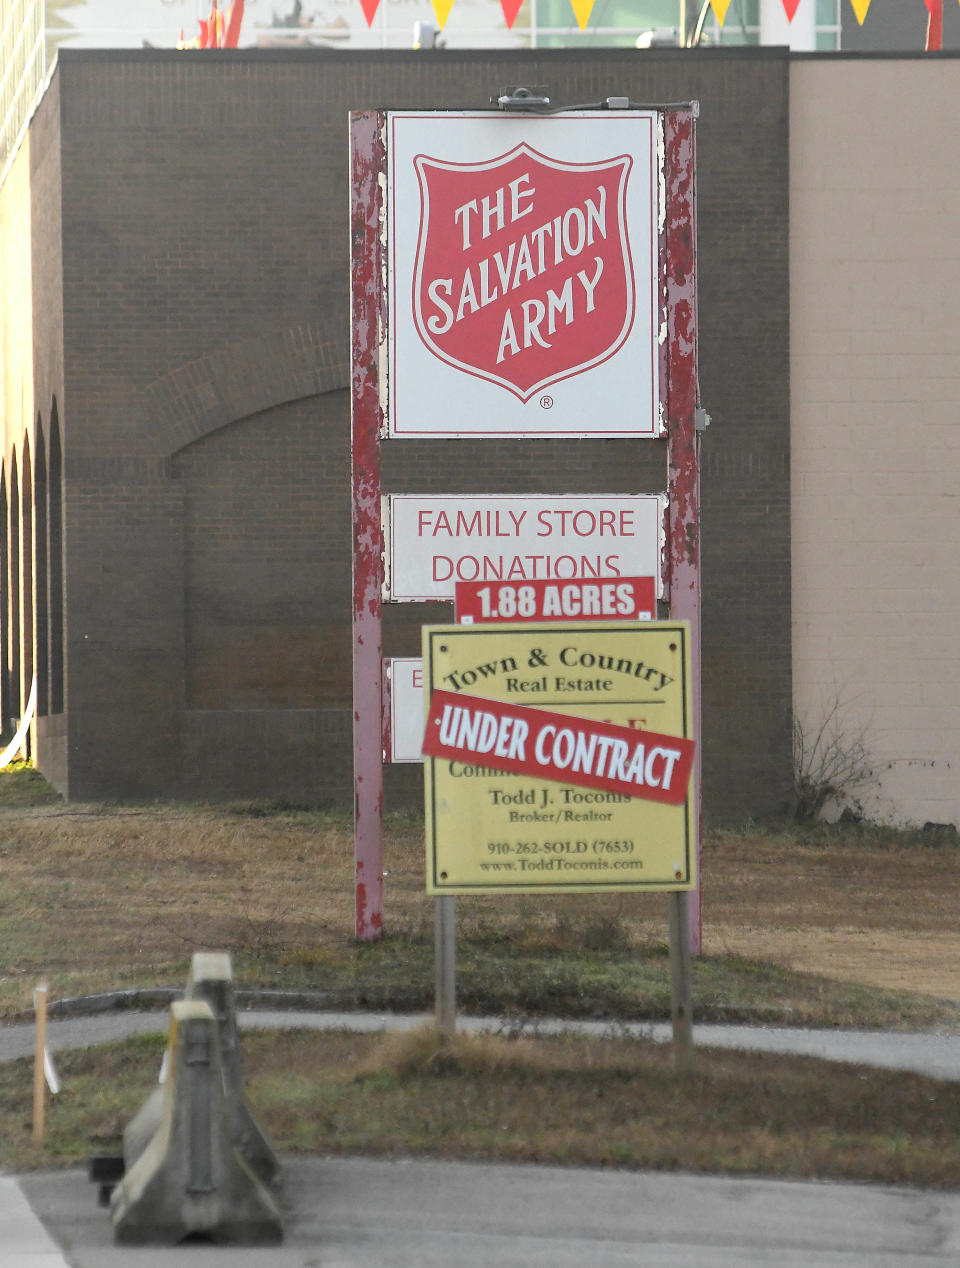 A StarNews file photo shows the Salvation Army building in downtown Wilmington. The city of Wilmington has plans to demolish the structures after purchasing the land for $4.8 million earlier this year.